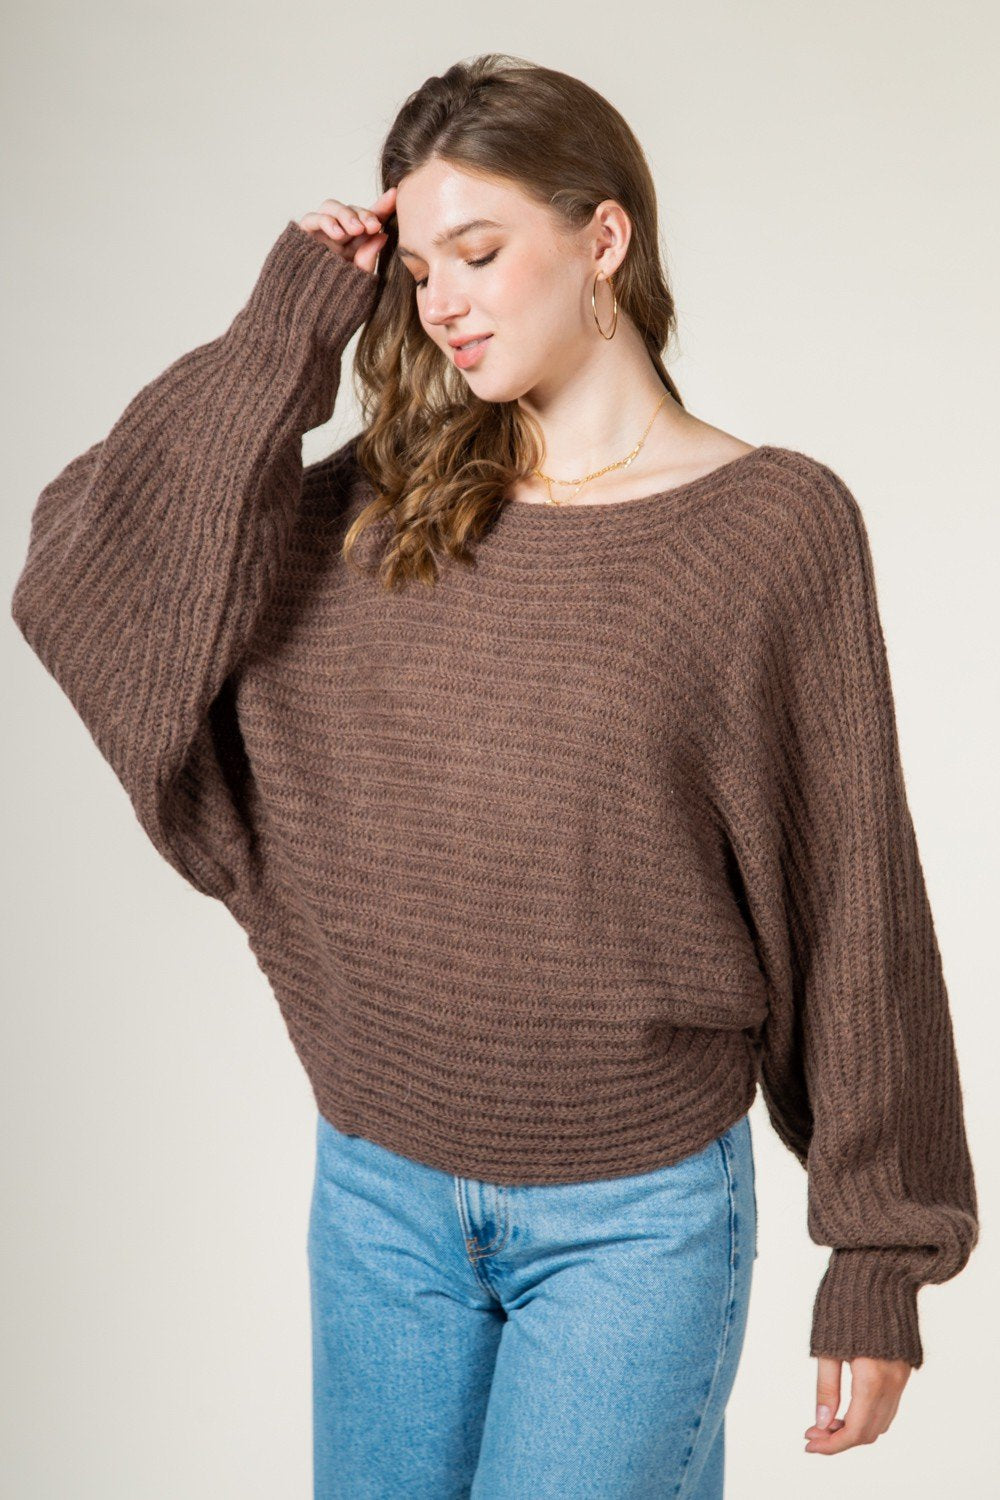 Forget About Tomorrow Sweater - Cocoa